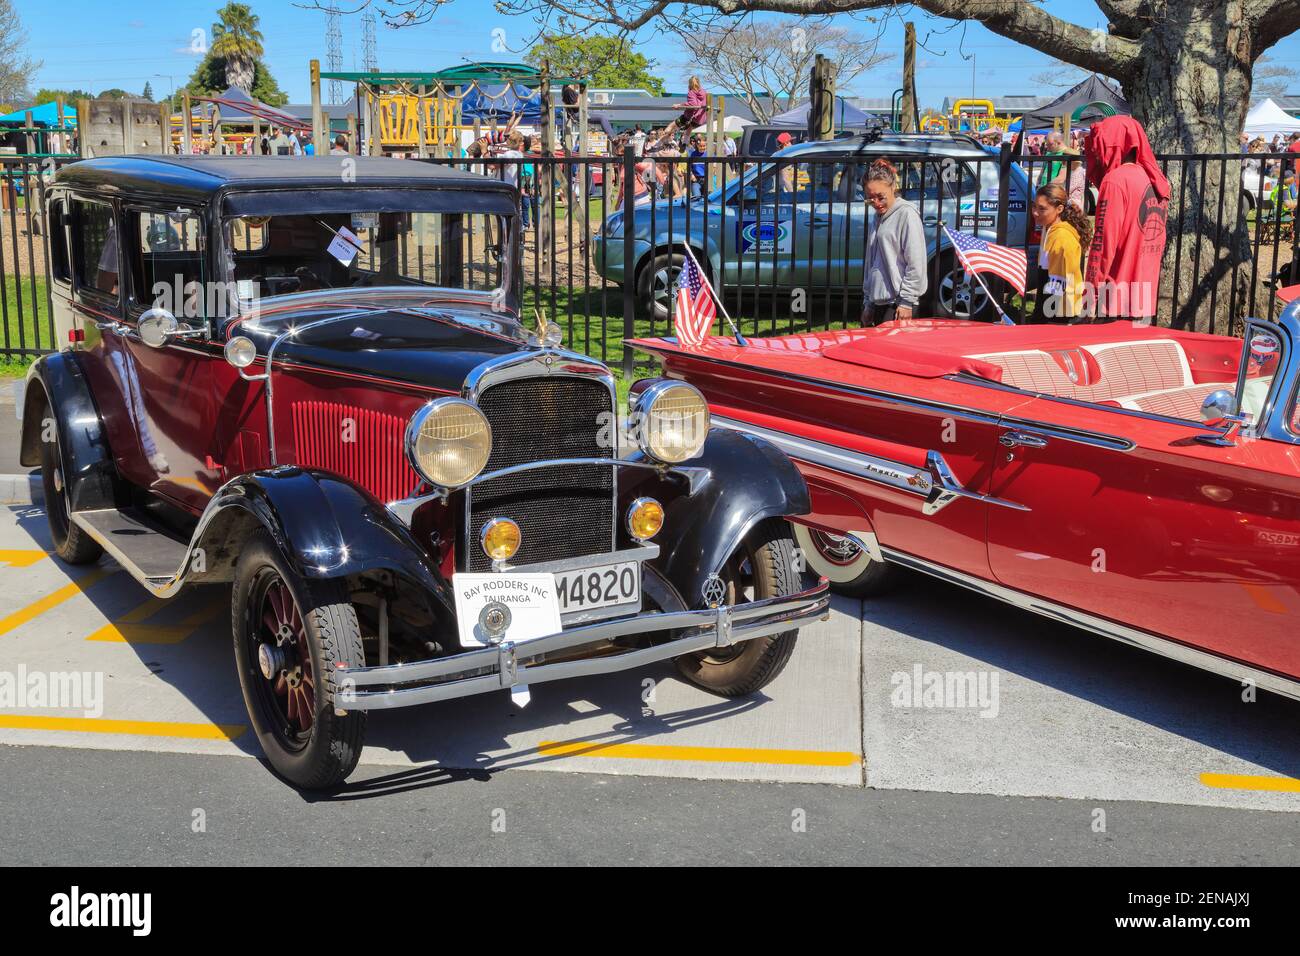 A 1929 Dodge 4-Door Sedan at a classic car show. Next to it is a red 1960 Chevrolet Impala Stock Photo